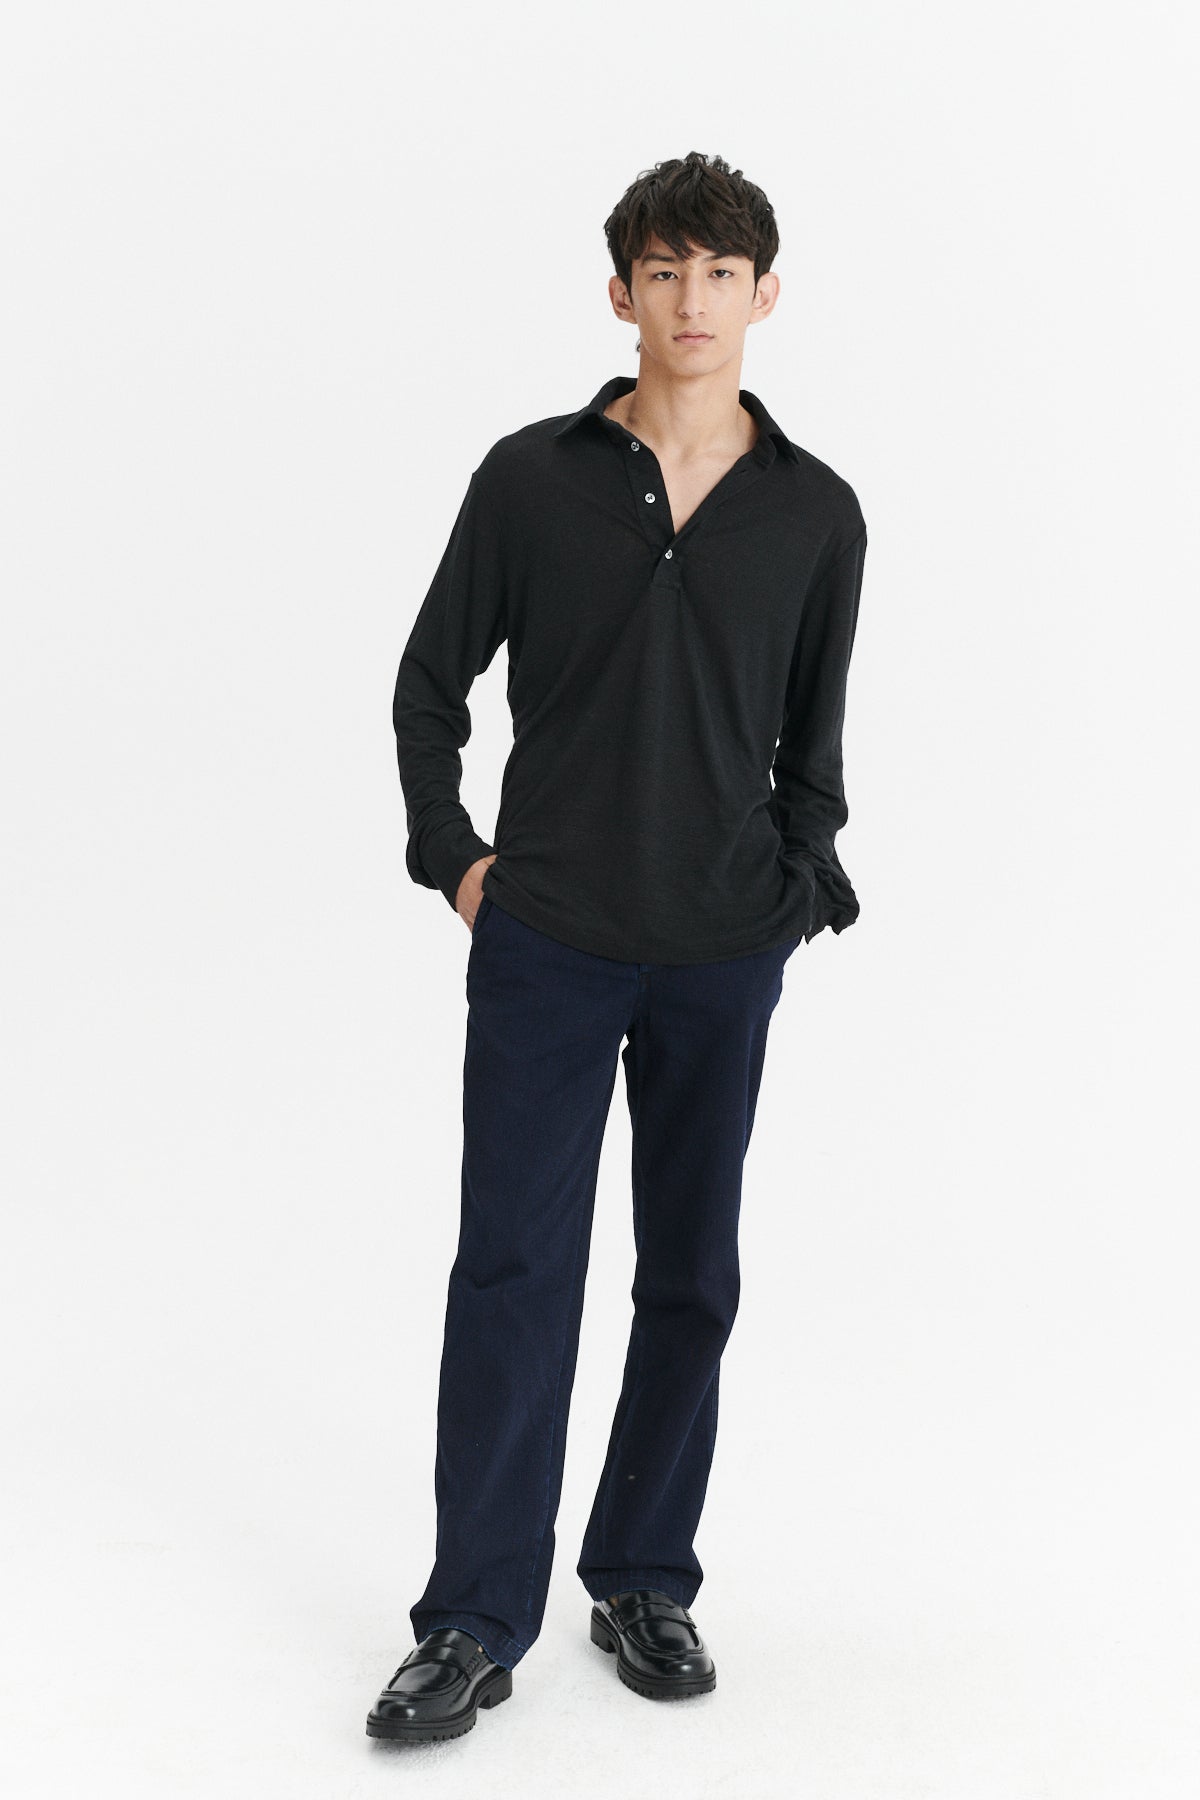 Long Sleeve Polo Shirt in the Finest Black Linen Jersey